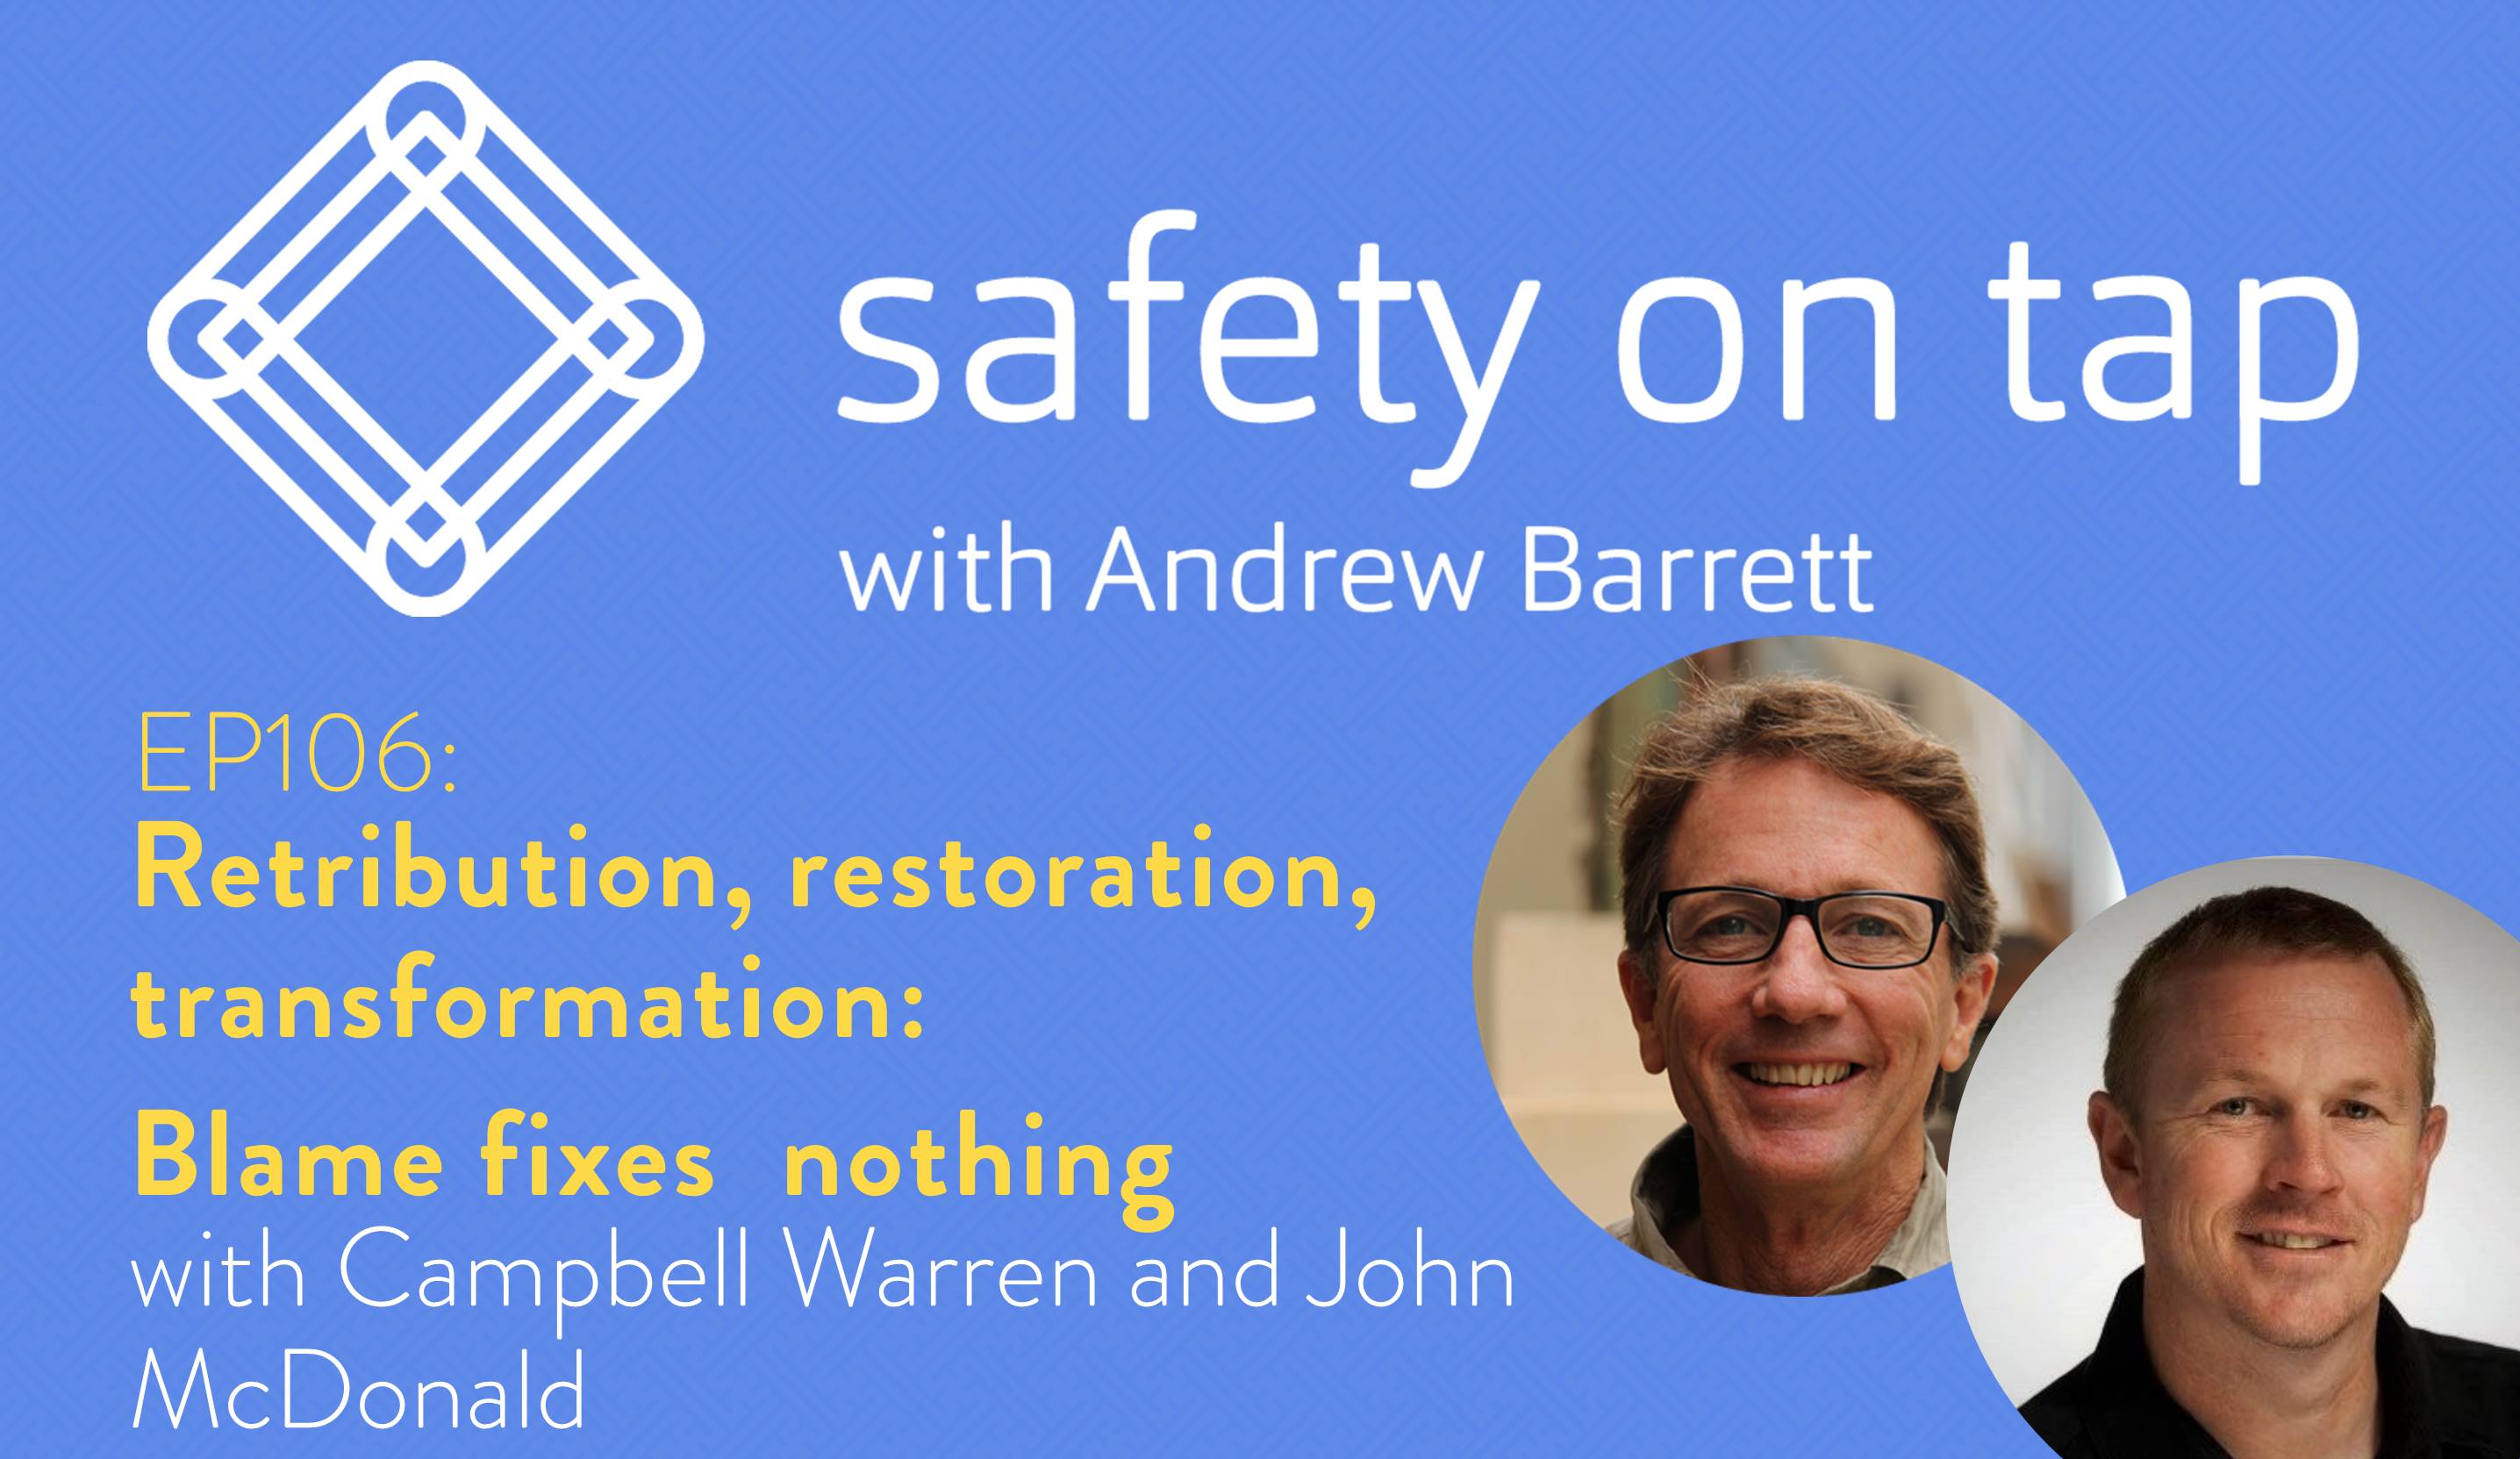 Ep106: Retribution, restoration, transformation: Blame fixes nothing, with Campbell Warren and John McDonald